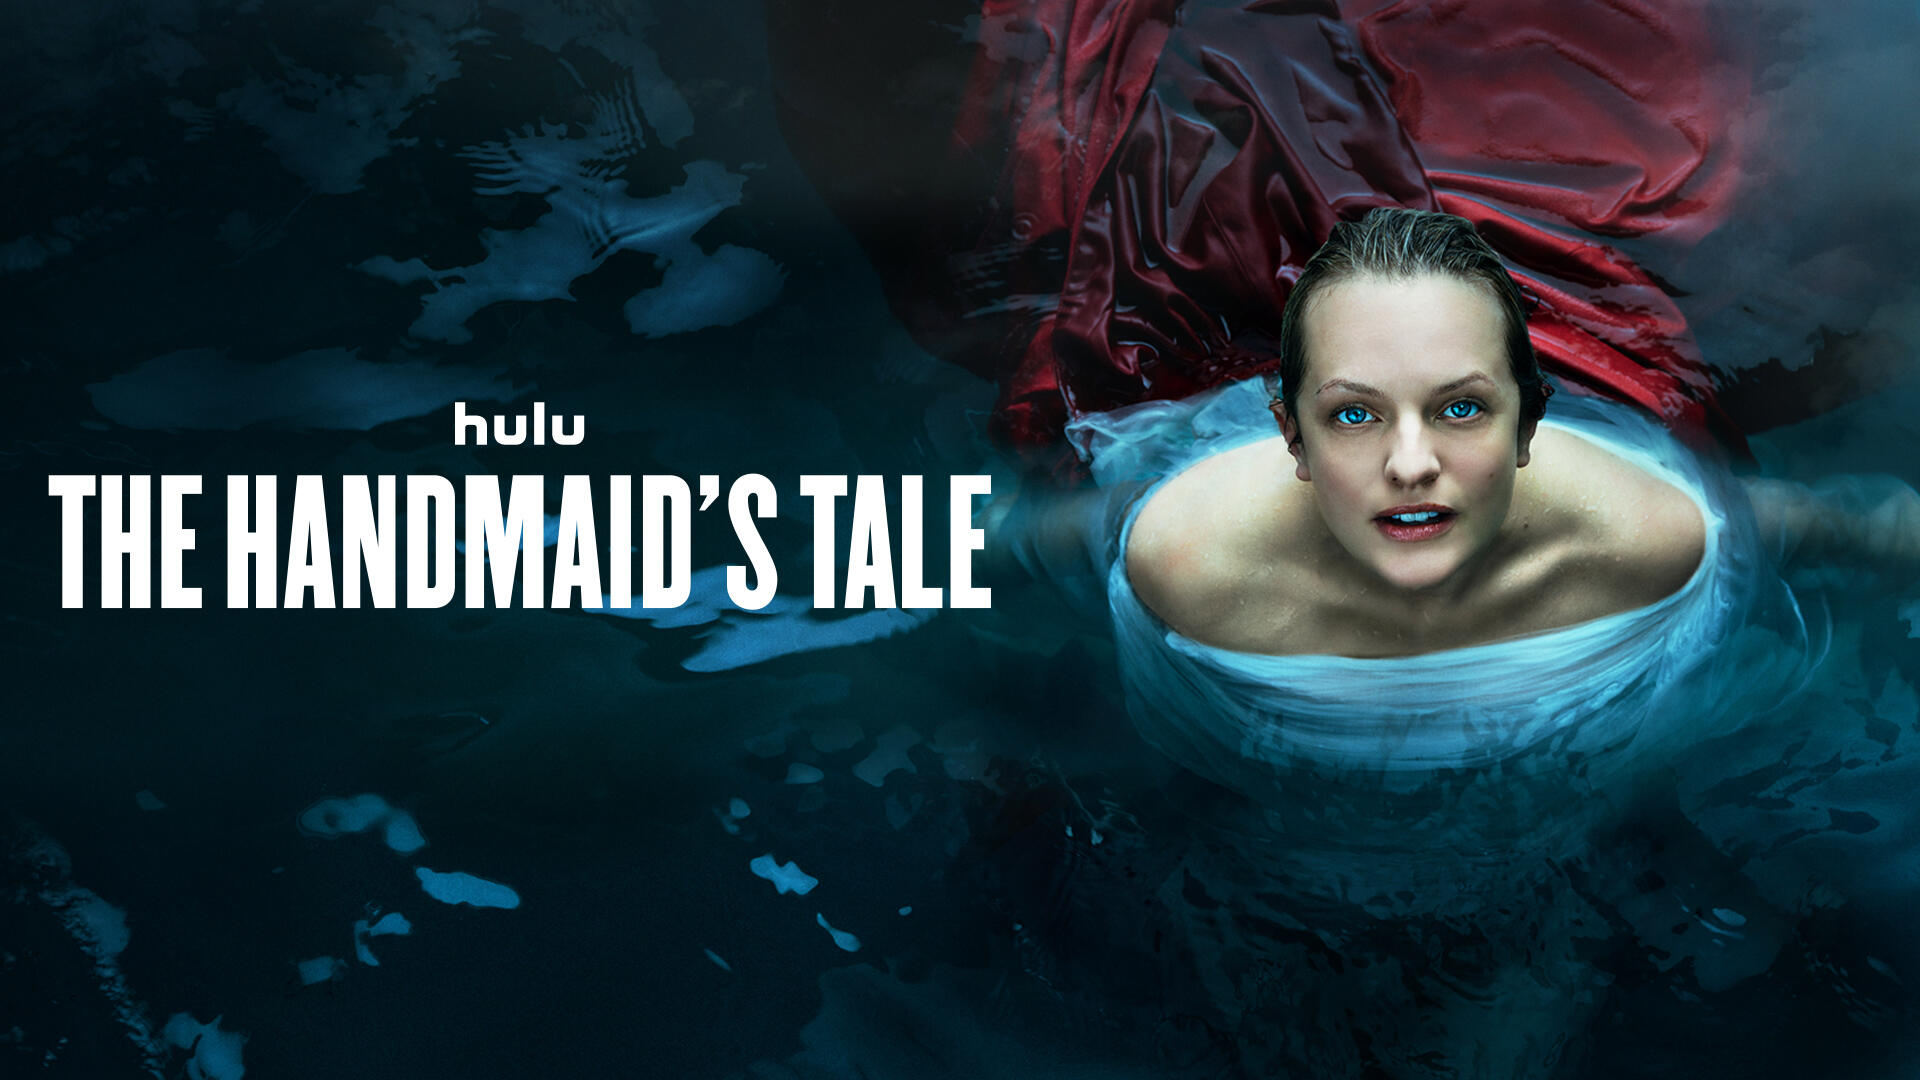 The Handmaid's Tale -- Season 5 -- June faces consequences for killing Commander Waterford while struggling to redefine her identity and purpose. The widowed Serena attempts to raise her profile in Toronto as Gilead’s influence creeps into Canada. Commander Lawrence works with Nick and Aunt Lydia as he tries to reform Gilead and rise in power. June, Luke and Moira fight Gilead from a distance as they continue their mission to save and reunite with Hannah. June (Elisabeth Moss), shown. (Courtesy of Hulu)